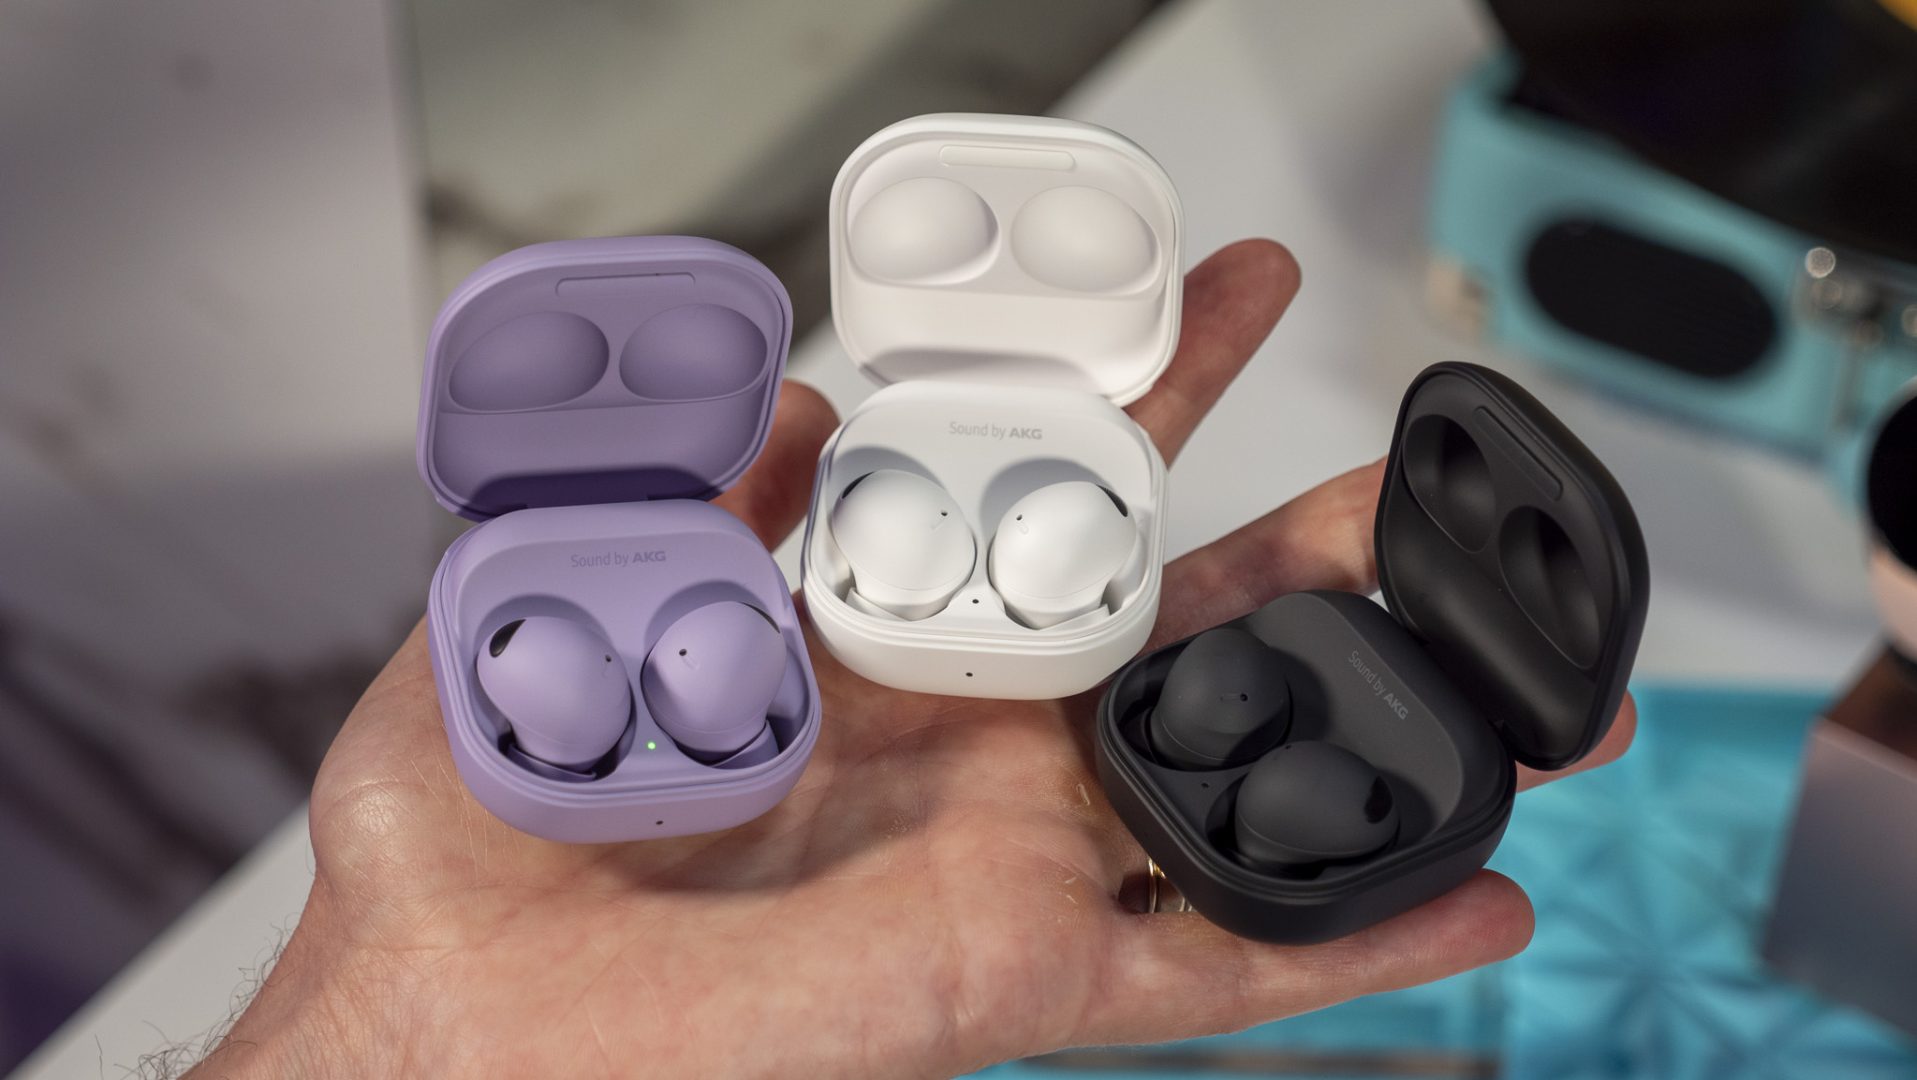 Samsung’s wearable app reaffirms the new stem design of the Galaxy Buds 3 and 3 Pro